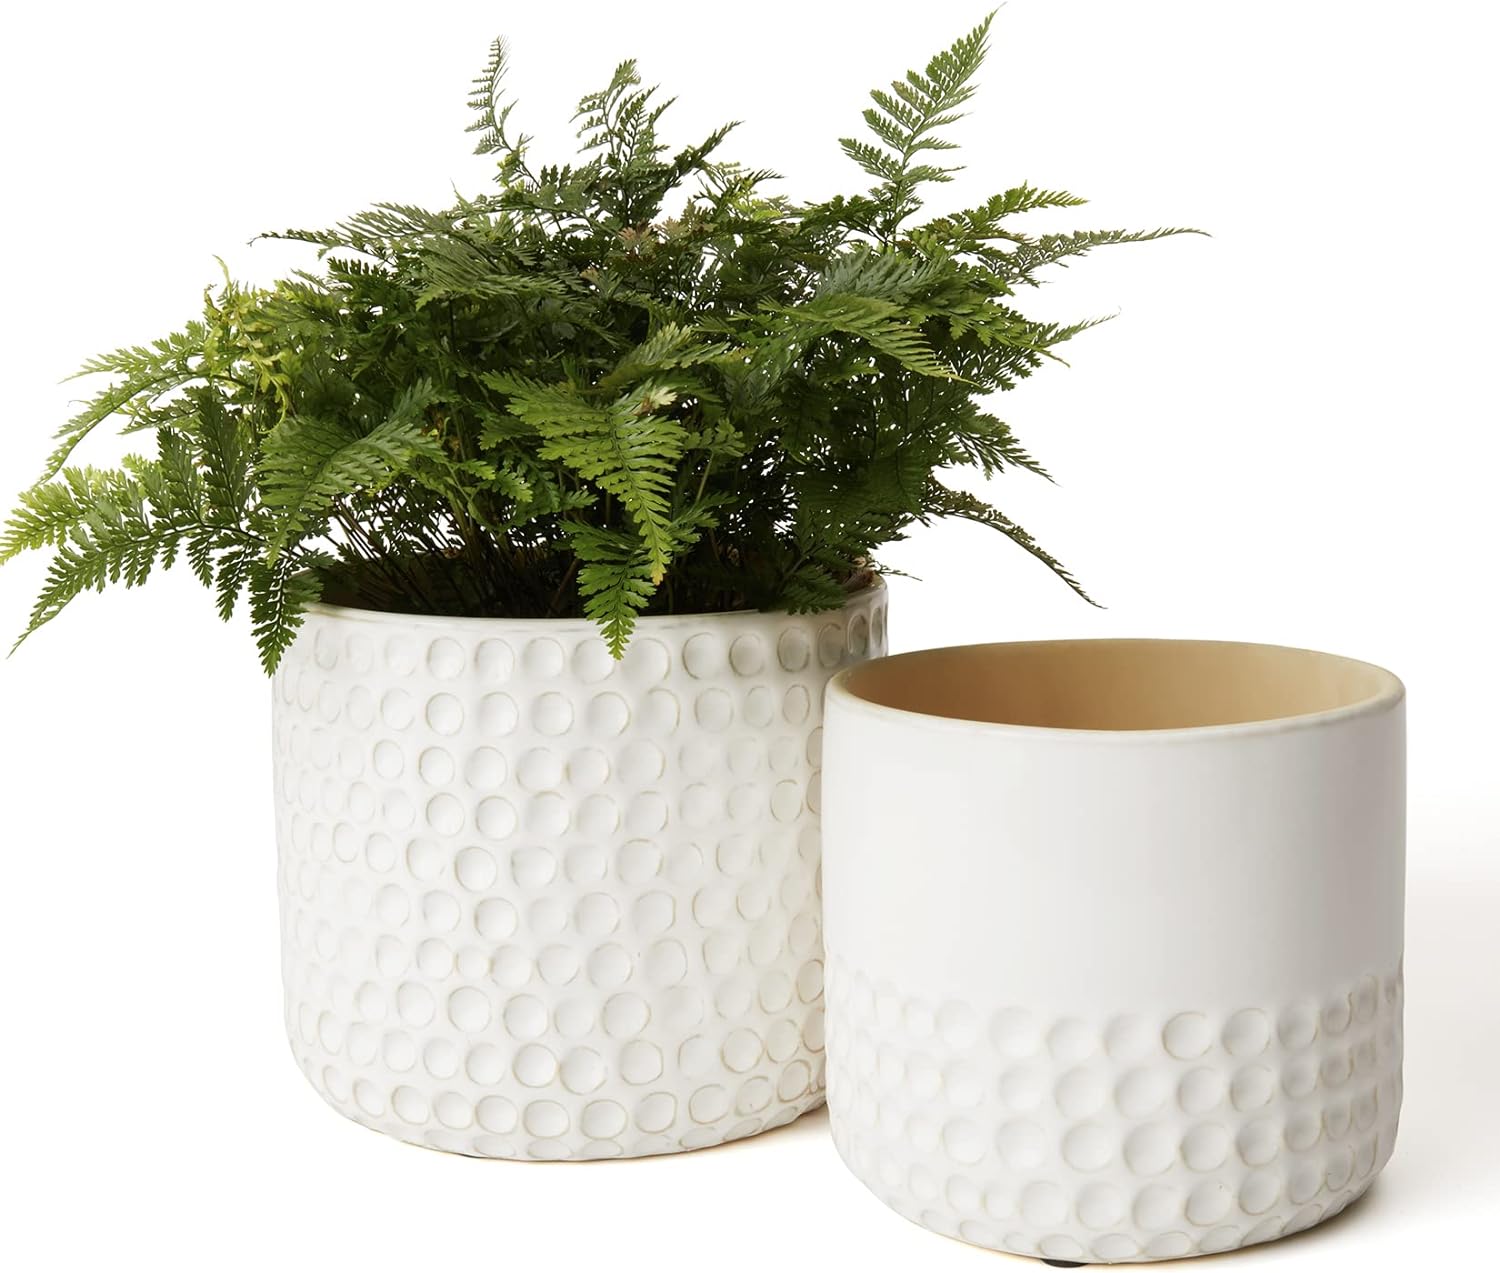 I ordered these pots to go on my bookshelf and they are perfect. The larger pot did come broken. I contacted customer service and they immediately sent me a replacement. Great customer service and great product.